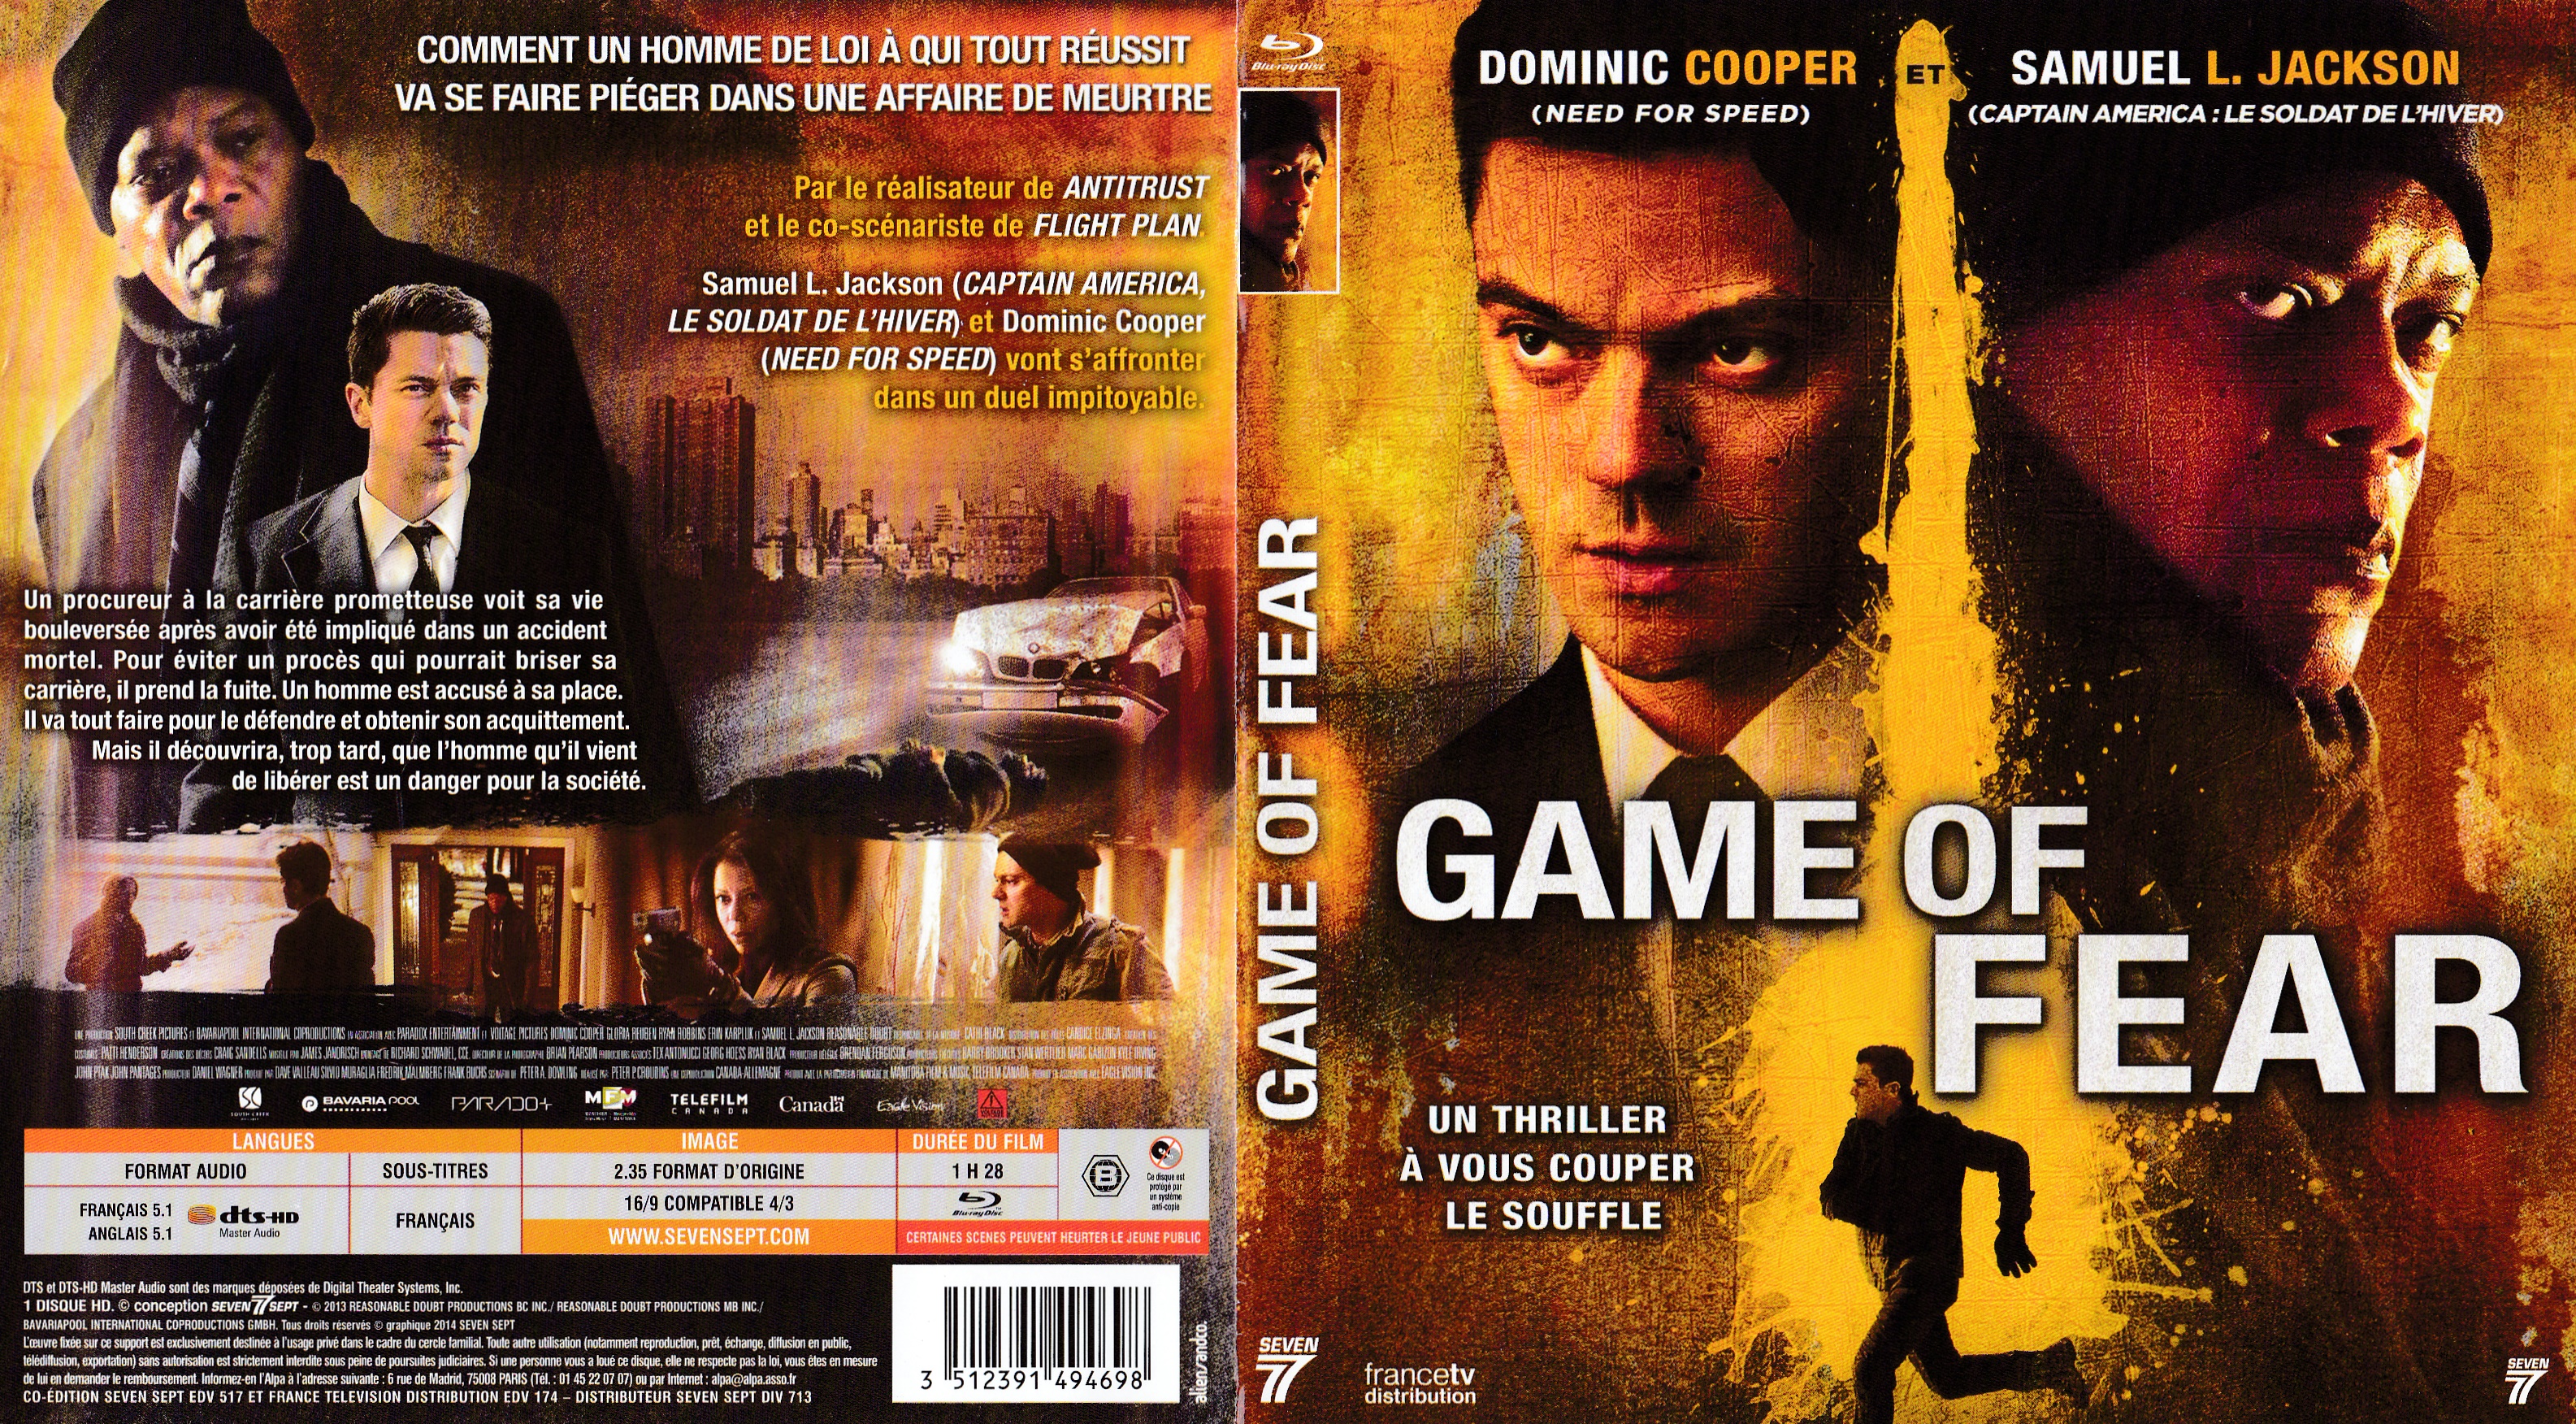 Jaquette DVD Game of fear (BLU-RAY)